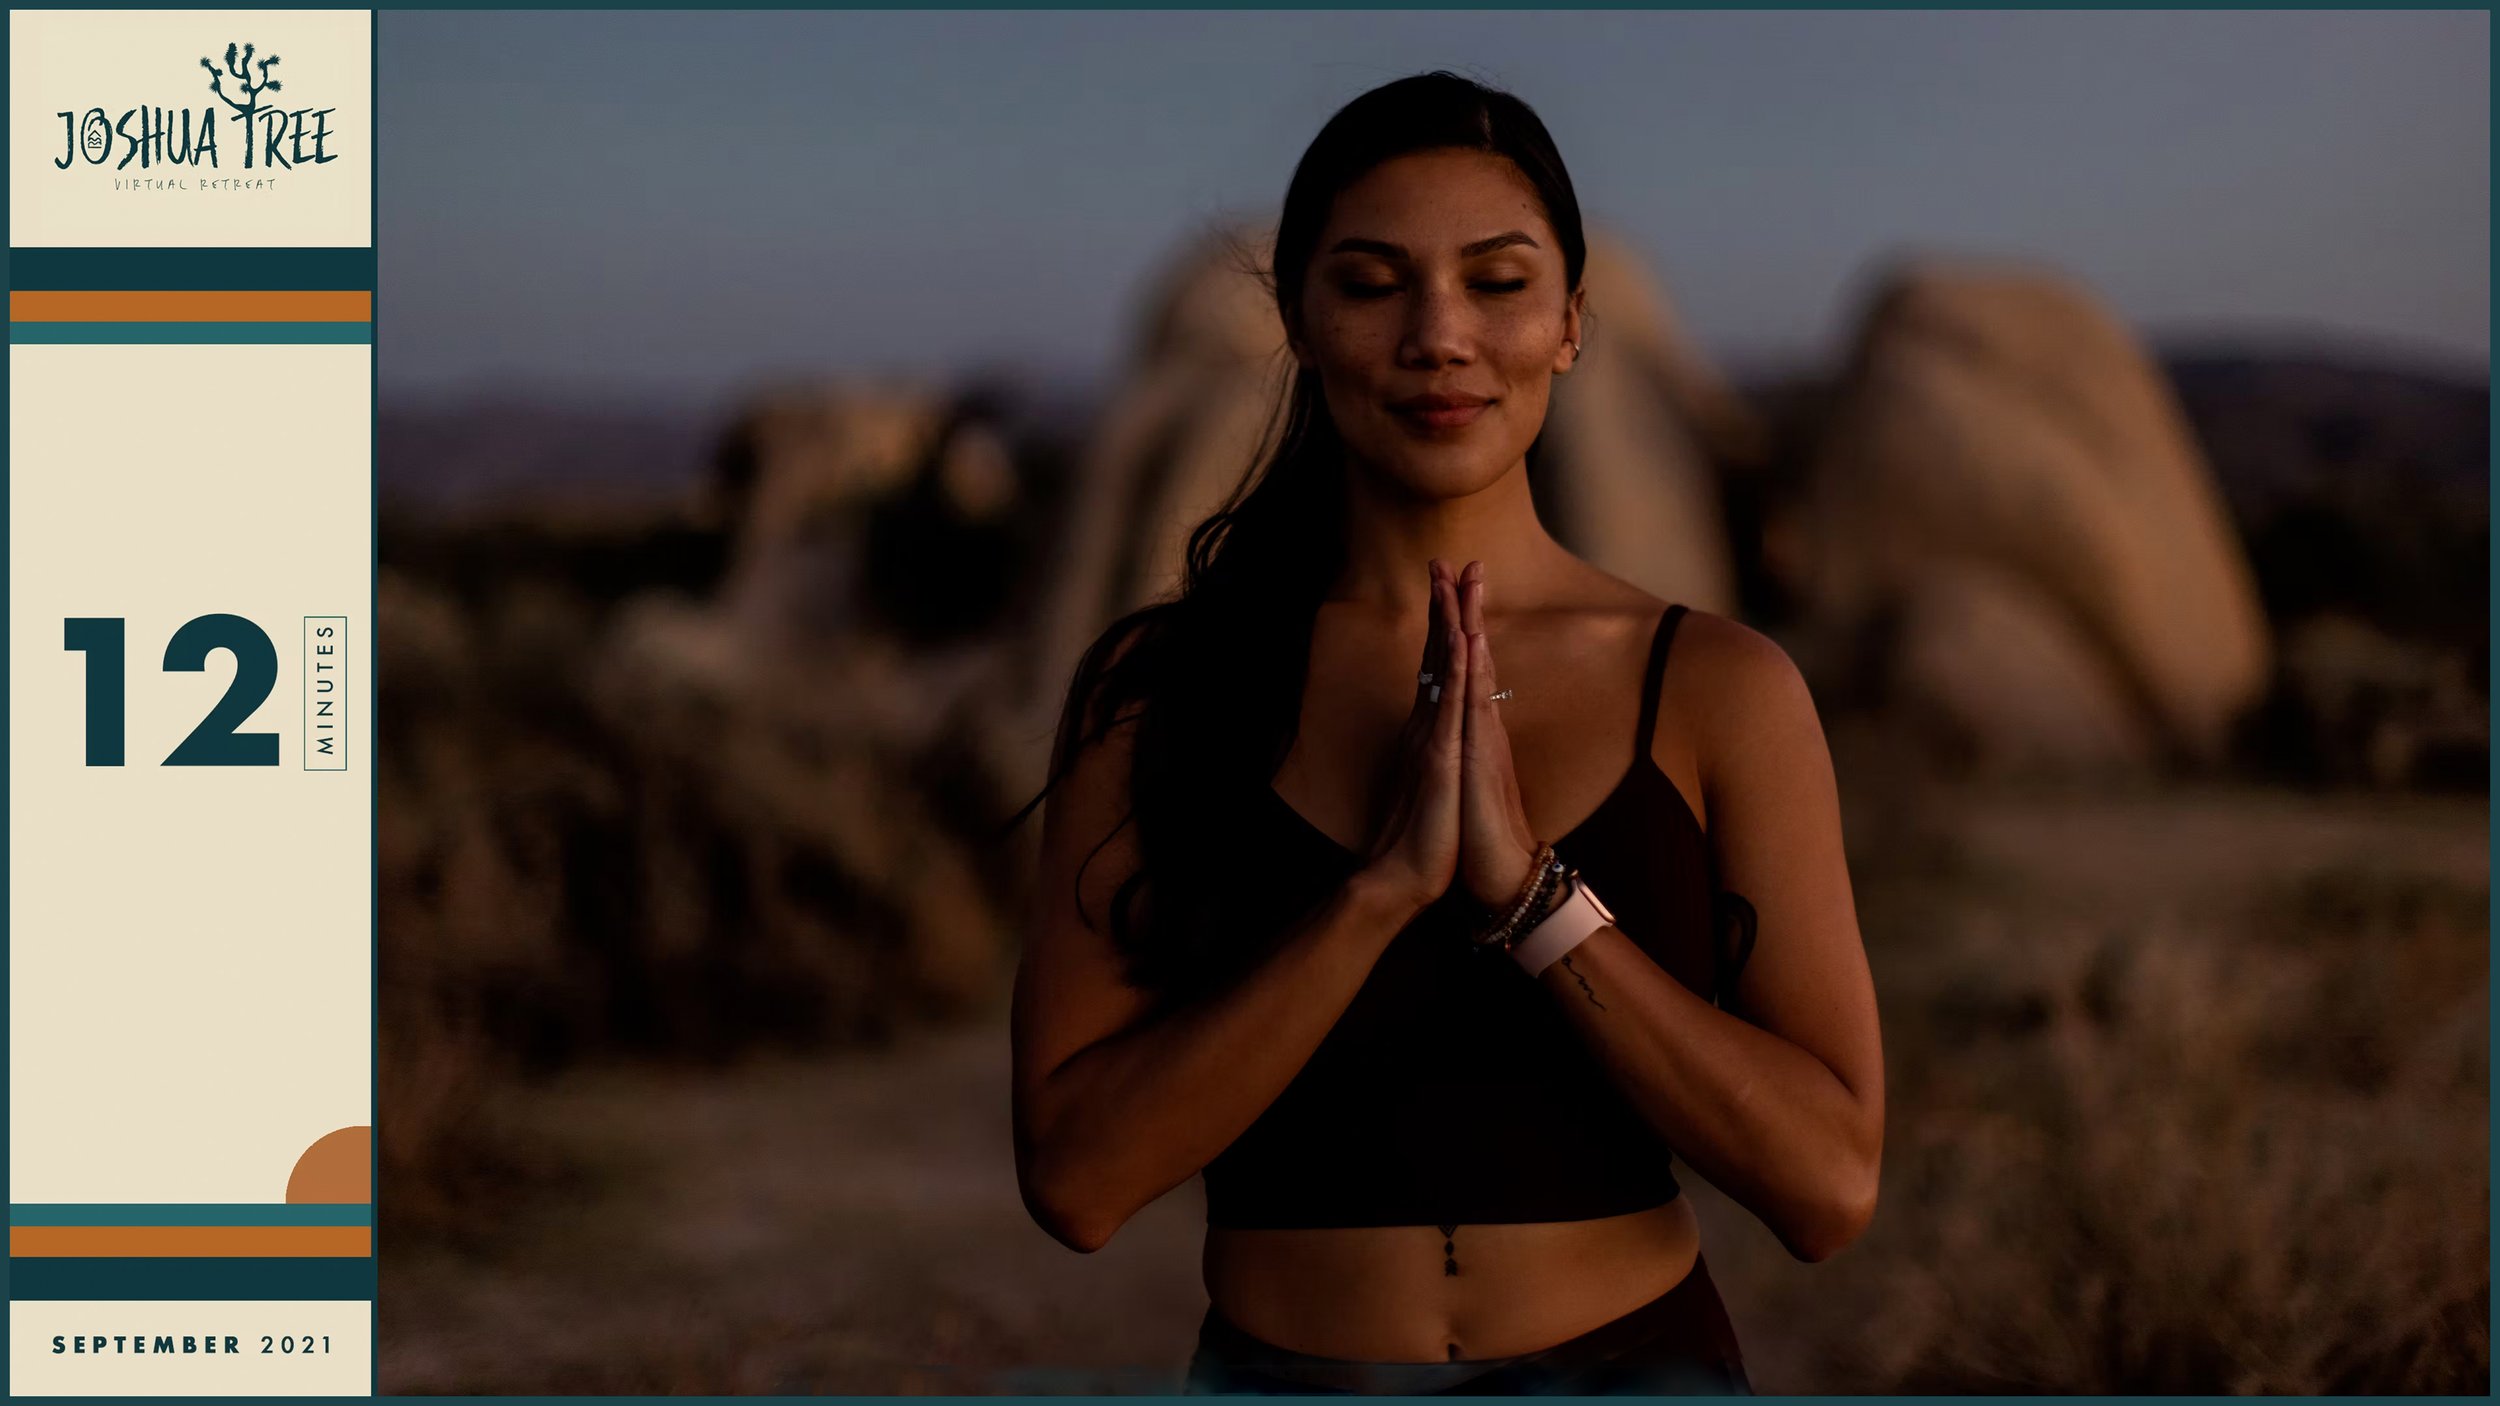 Joshua Tree Virtual Retreat | Find Your Inner Guide | 12 minutes